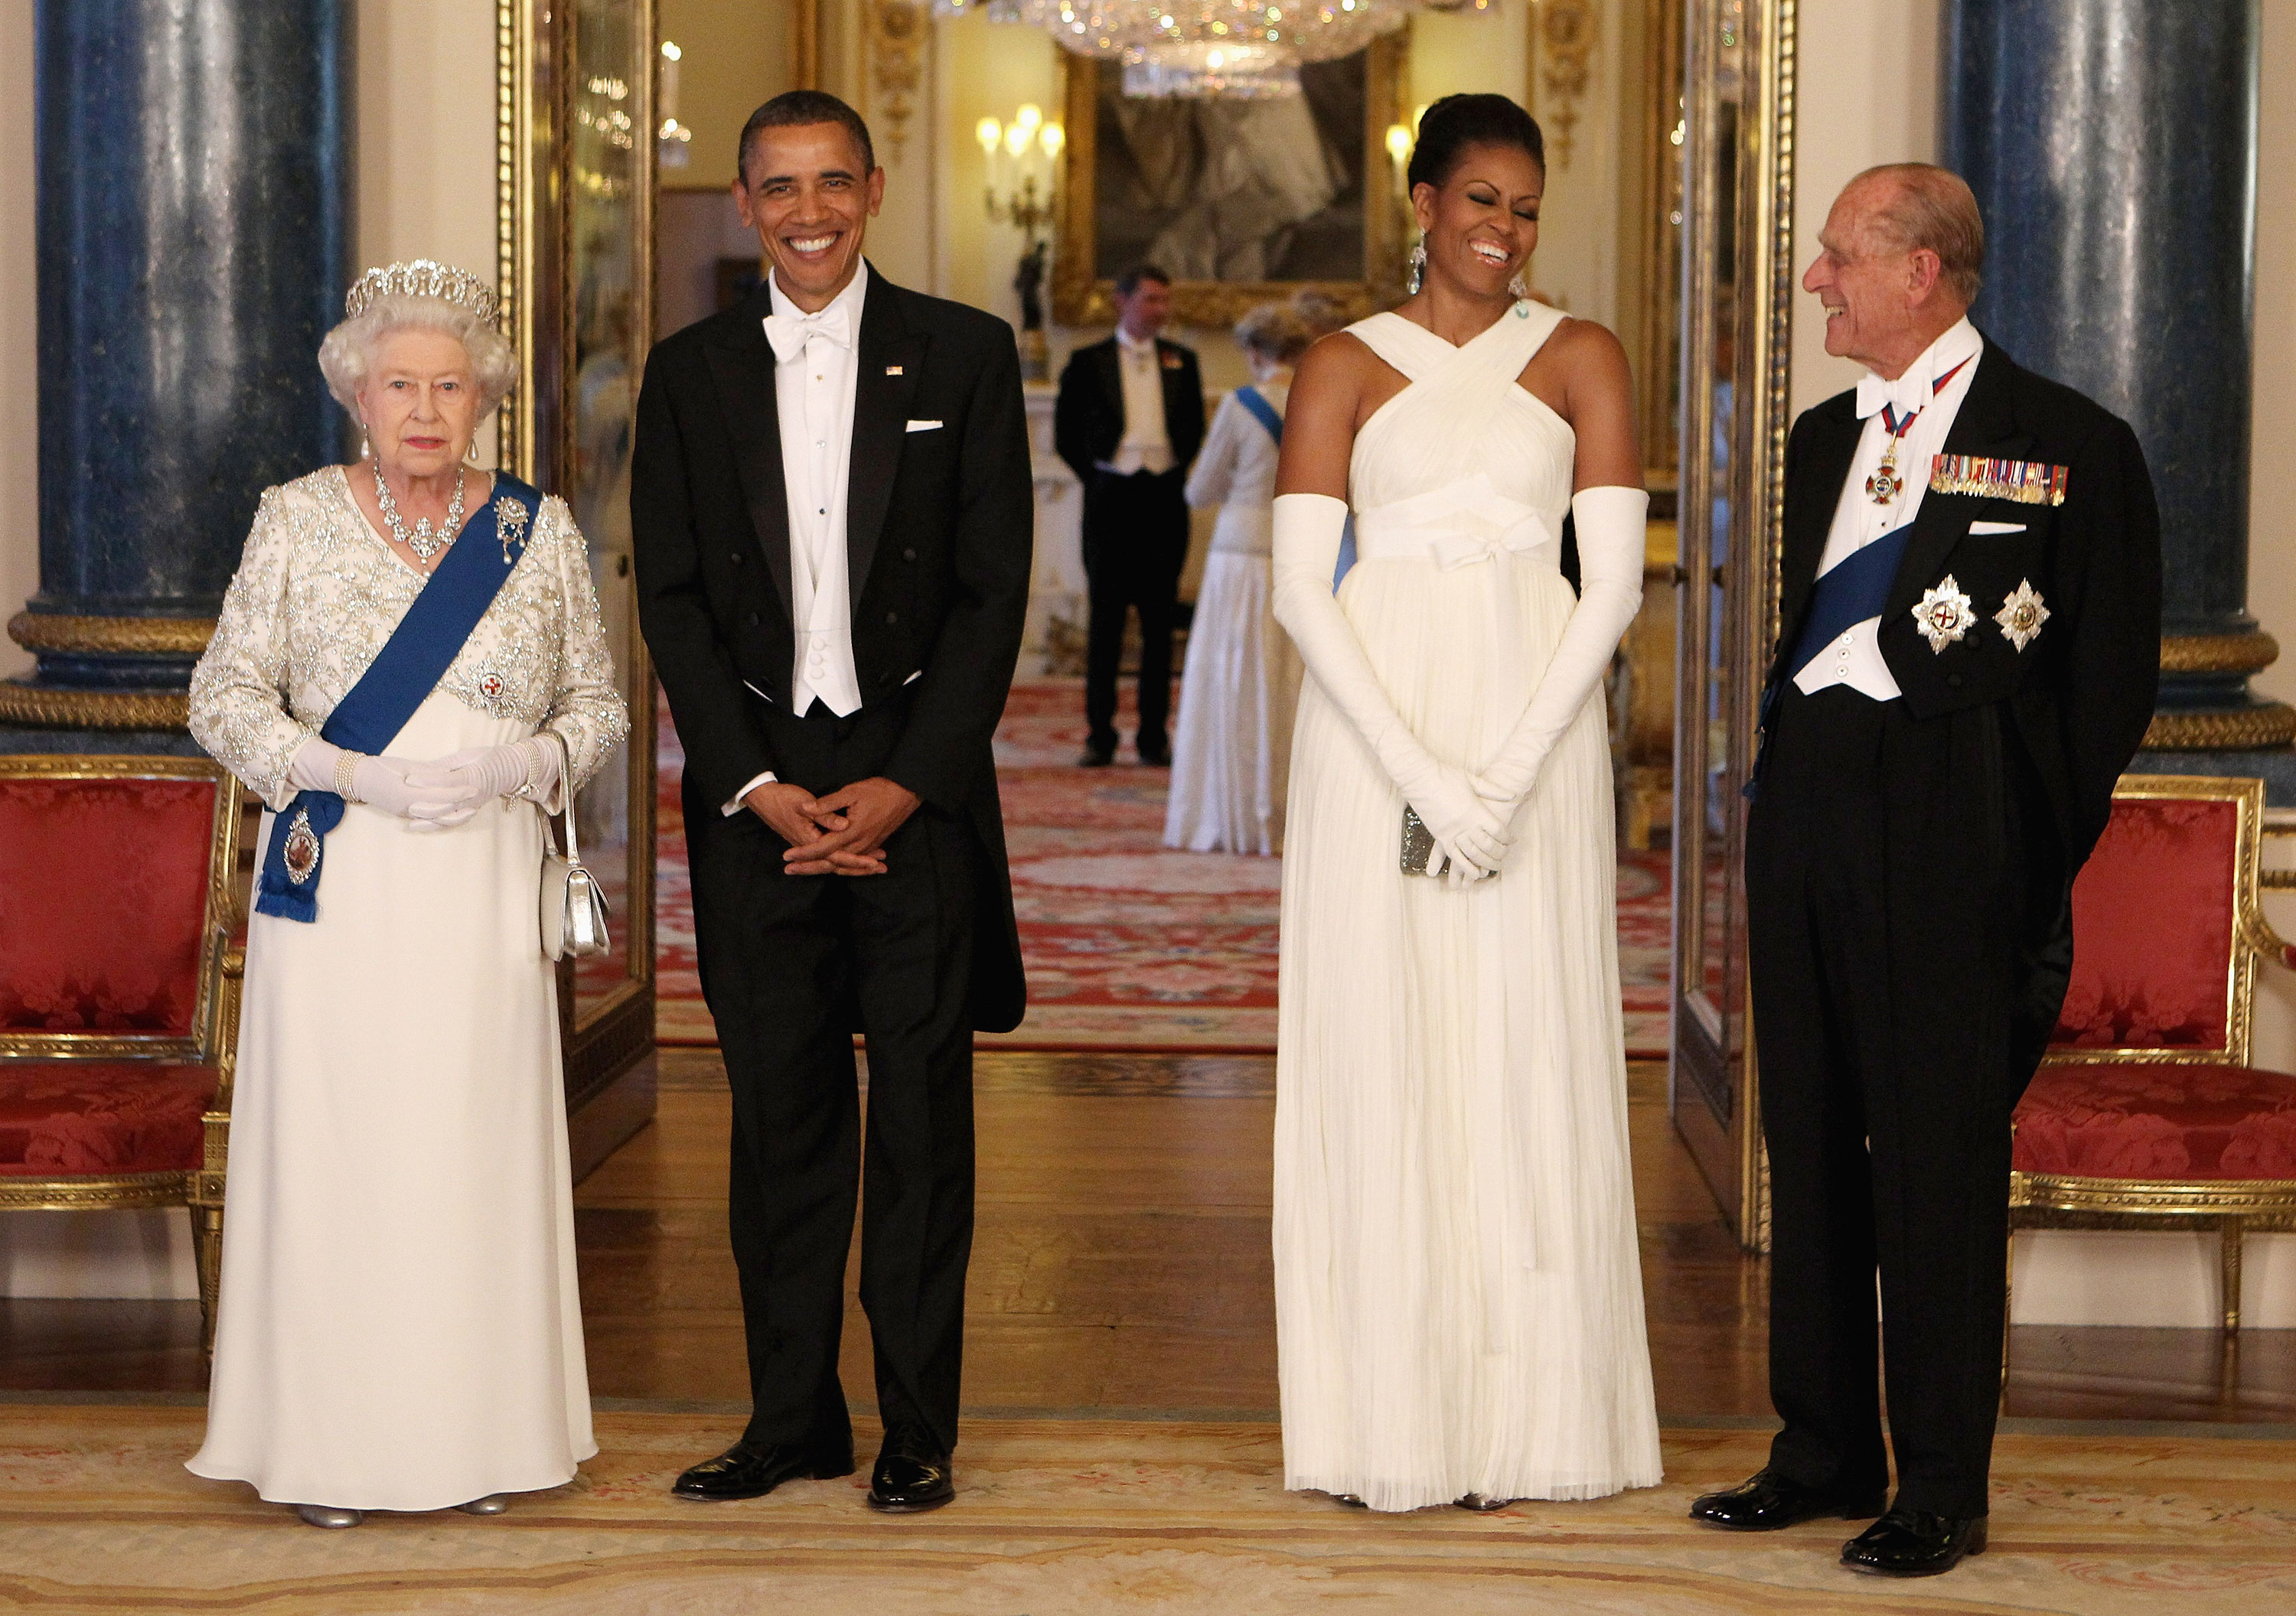 The Queen poses with President Barack Obama and Michelle Obama and Prince Philip, Duke of Edinburgh in 2011 in London.